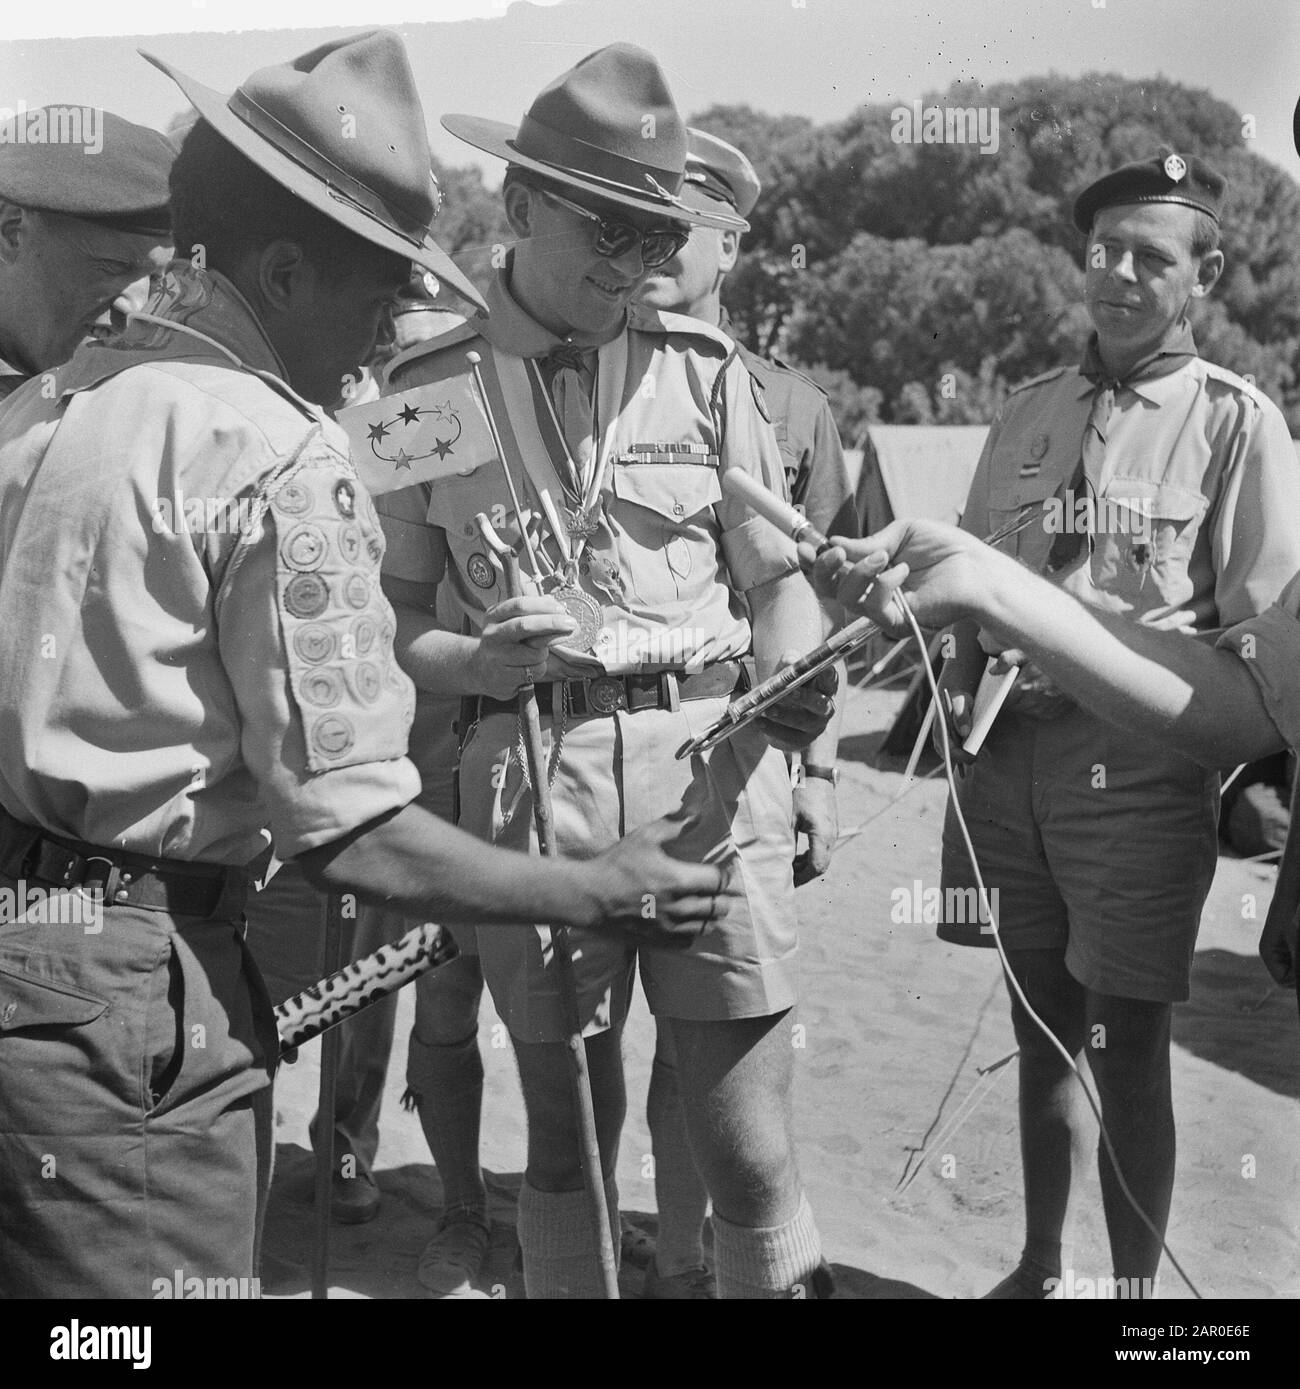 Jamboree 1963 at Marathon Greece. The only Surinamer in the camp gave the prince an article of his country Date: 12 August 1963 Location: Greece Keywords: COUNTRIES, camps, princes Institution name: Jamboree Stock Photo